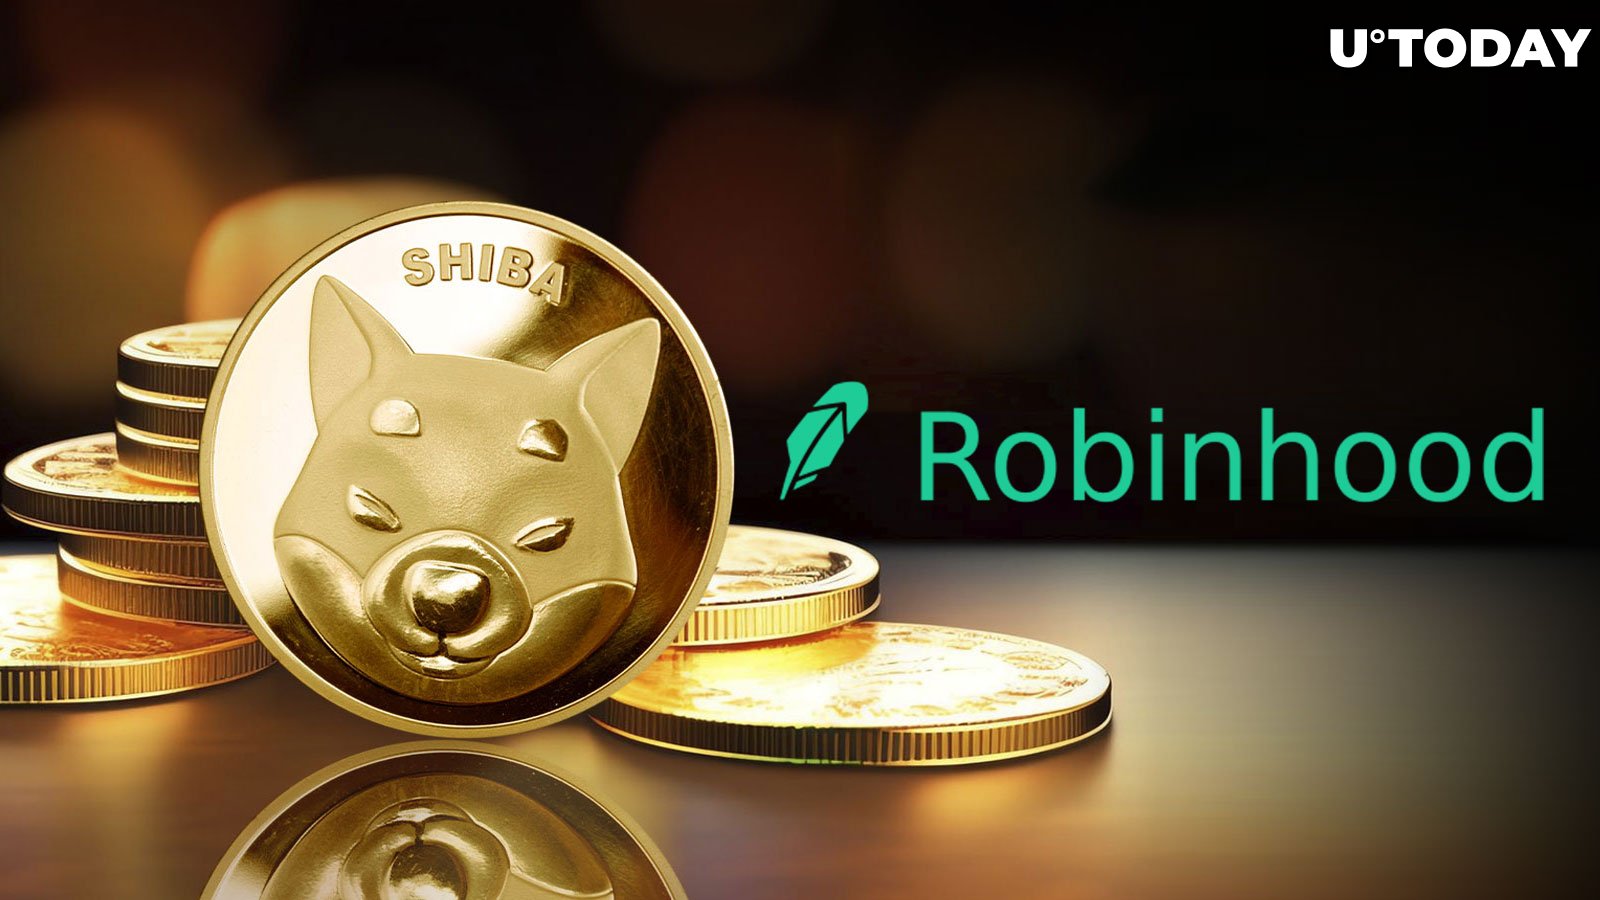 Shiba Inu (SHIB) Now Available to Robinhood Customers in New York Alongside These Coins